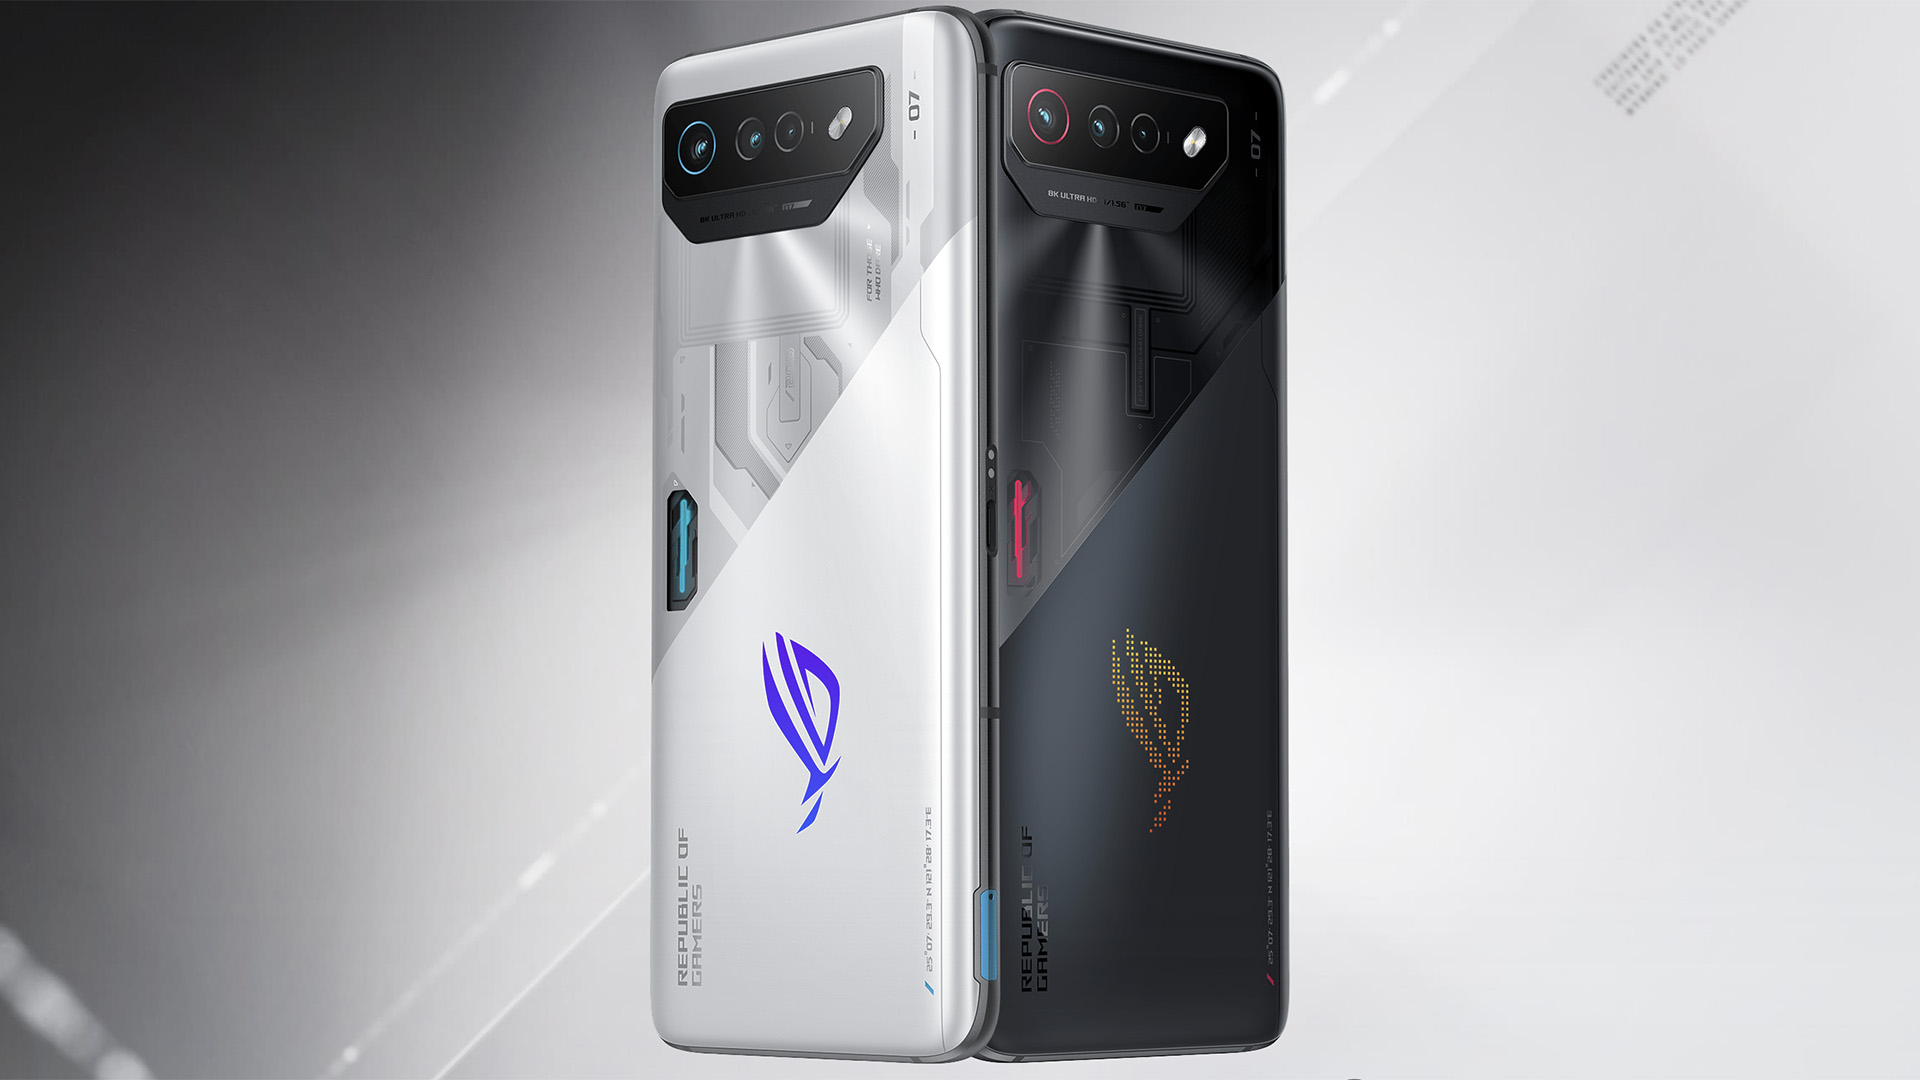 Asus' Gaming ROG Phone 8 (Pro) Design and Beefier Specs Leaked